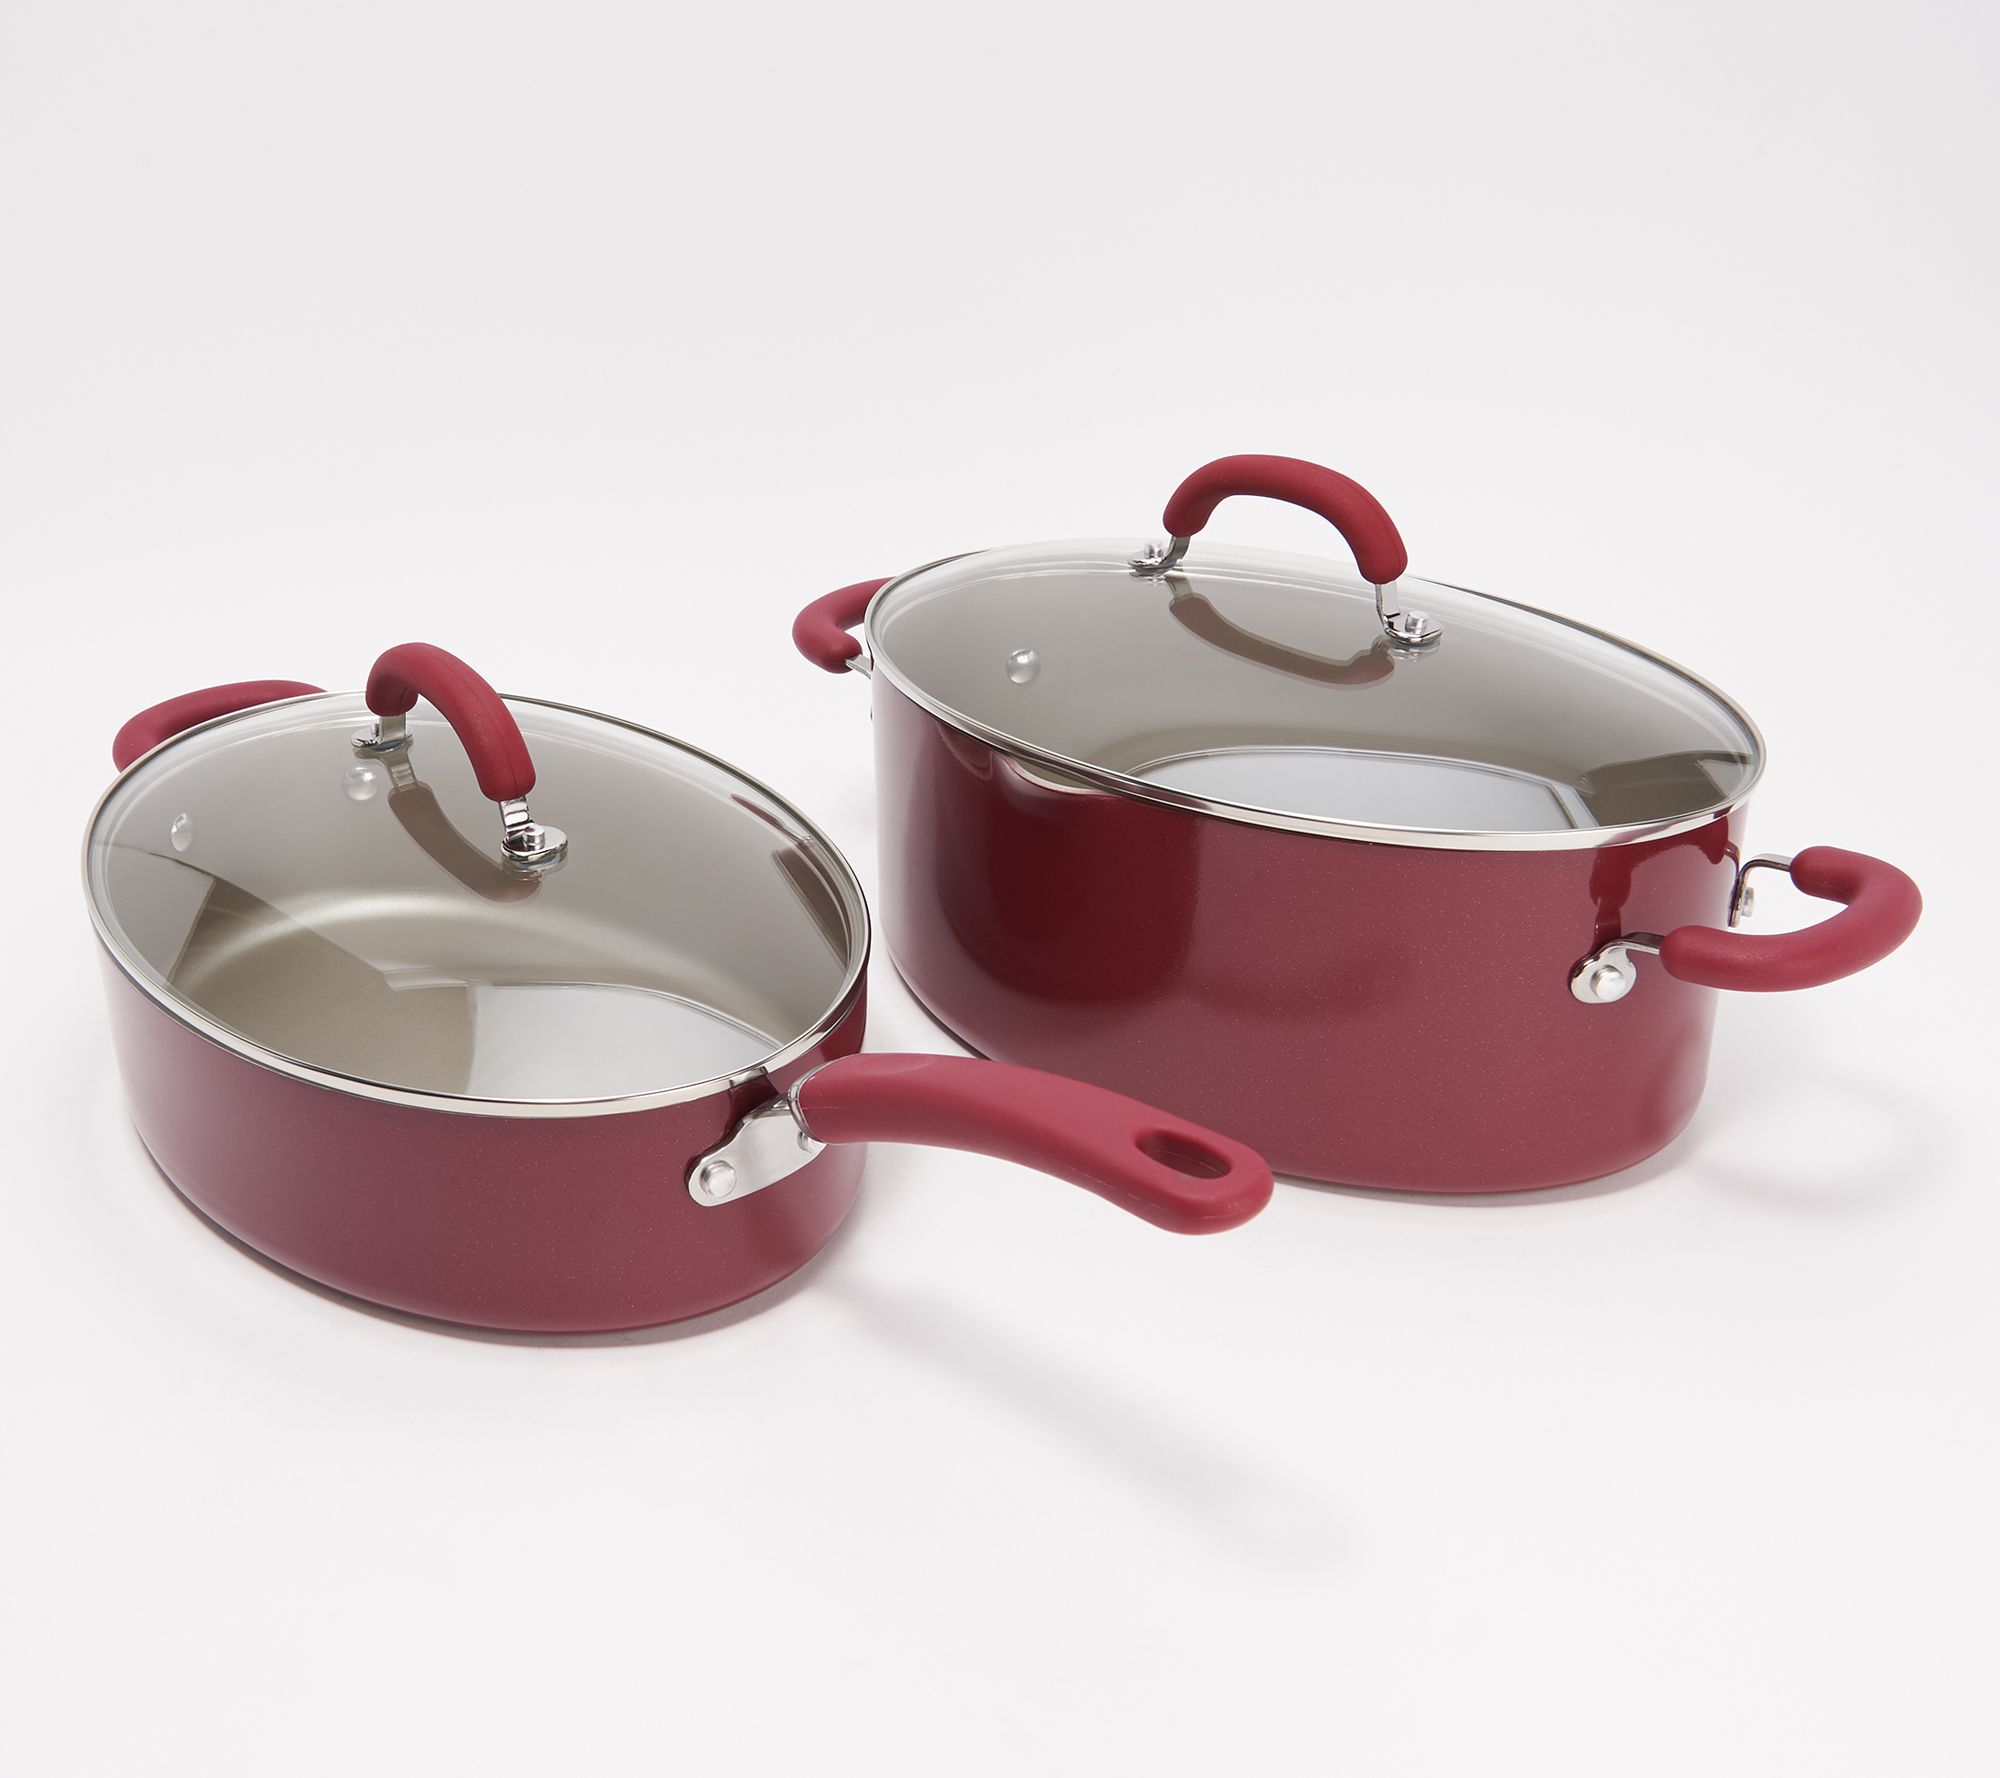 Rachael Ray Create Delicious Nonstick Deep Frying Pans - Red, 2 pc - Baker's